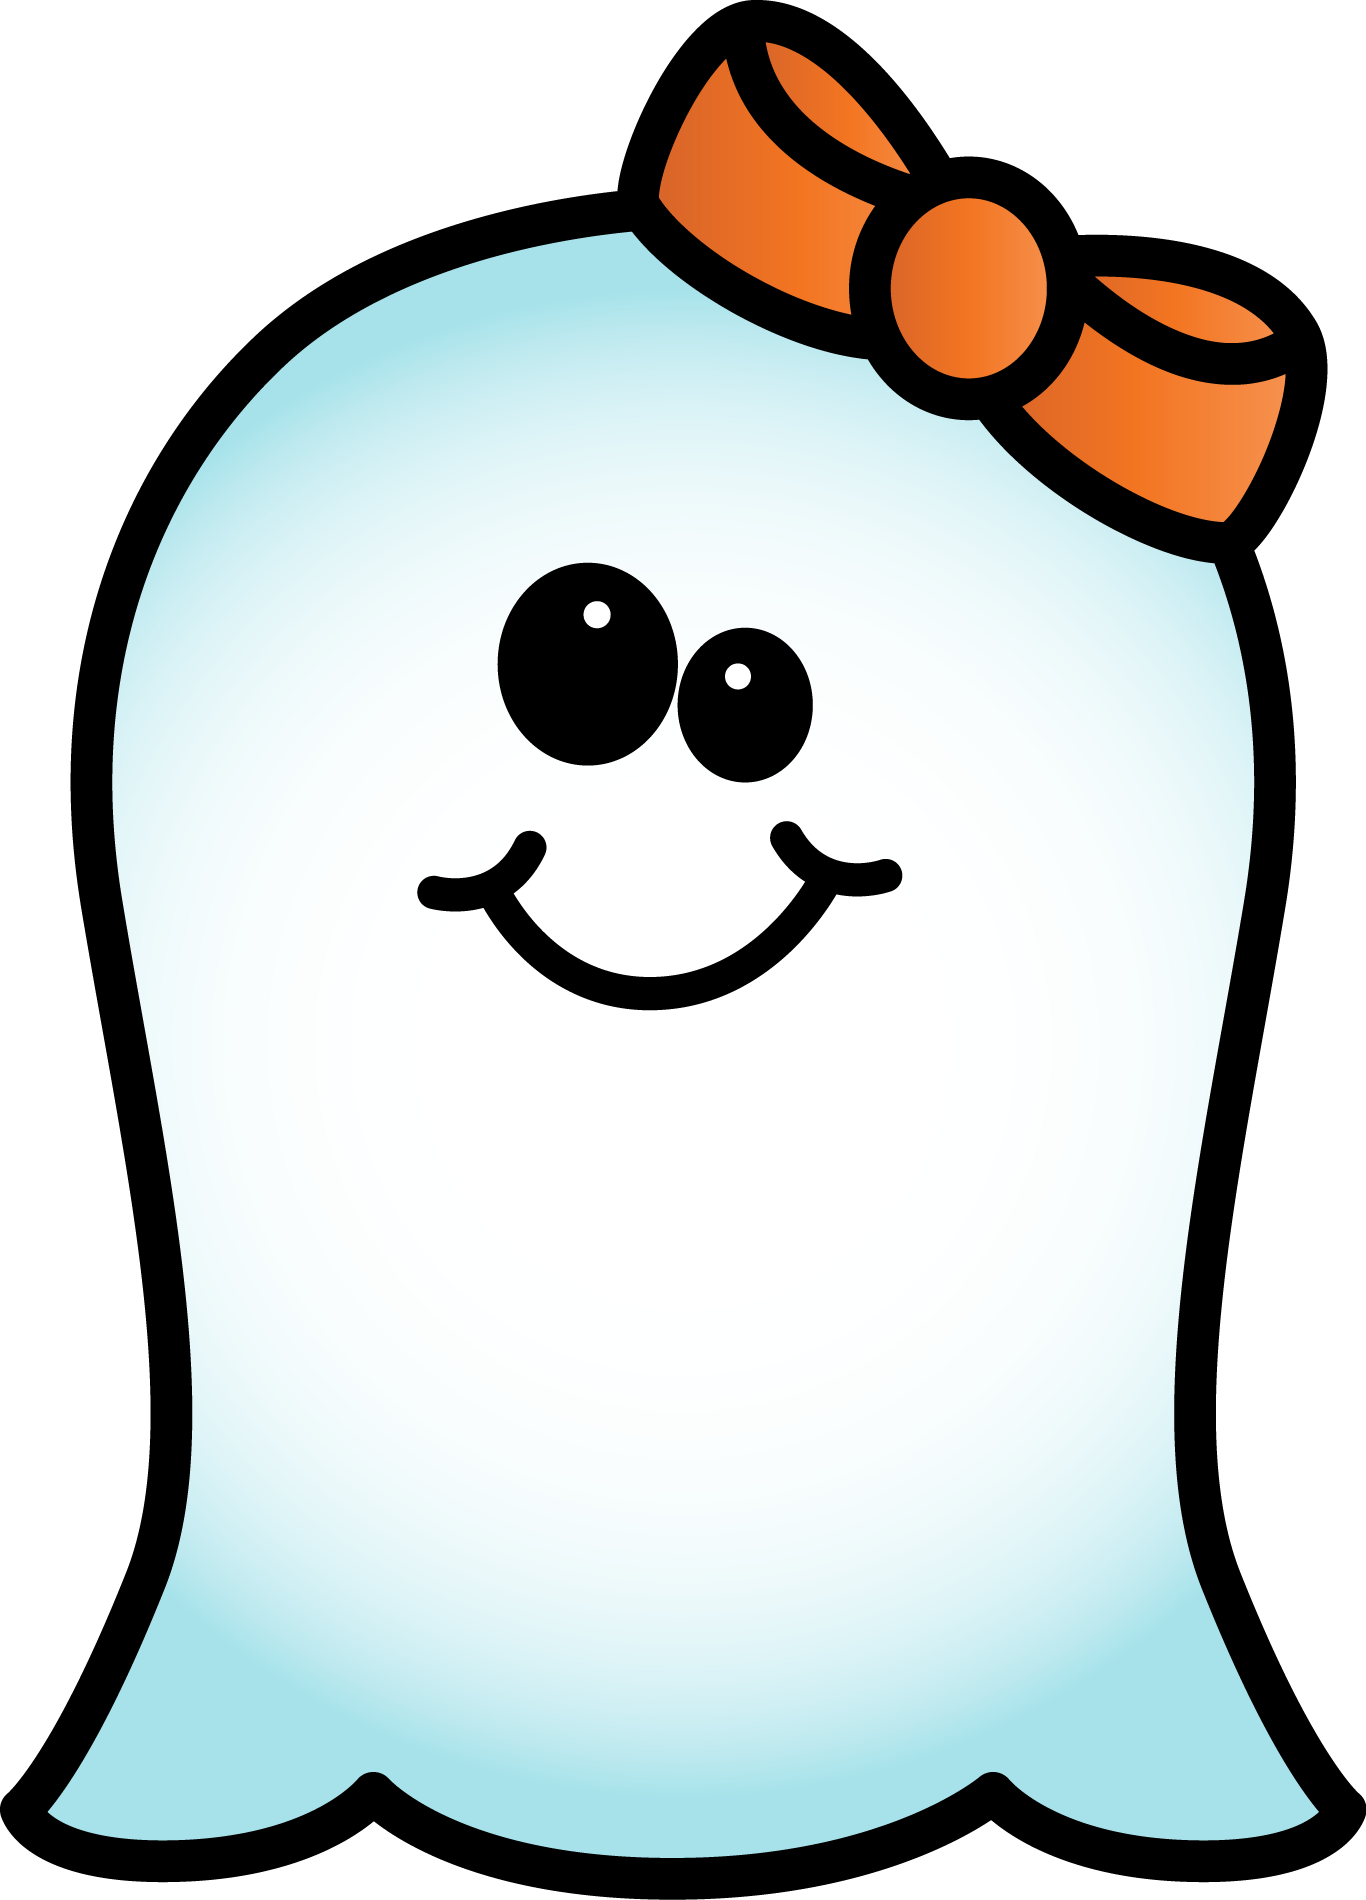 Download Ghost clipart girly, Ghost girly Transparent FREE for download on WebStockReview 2021